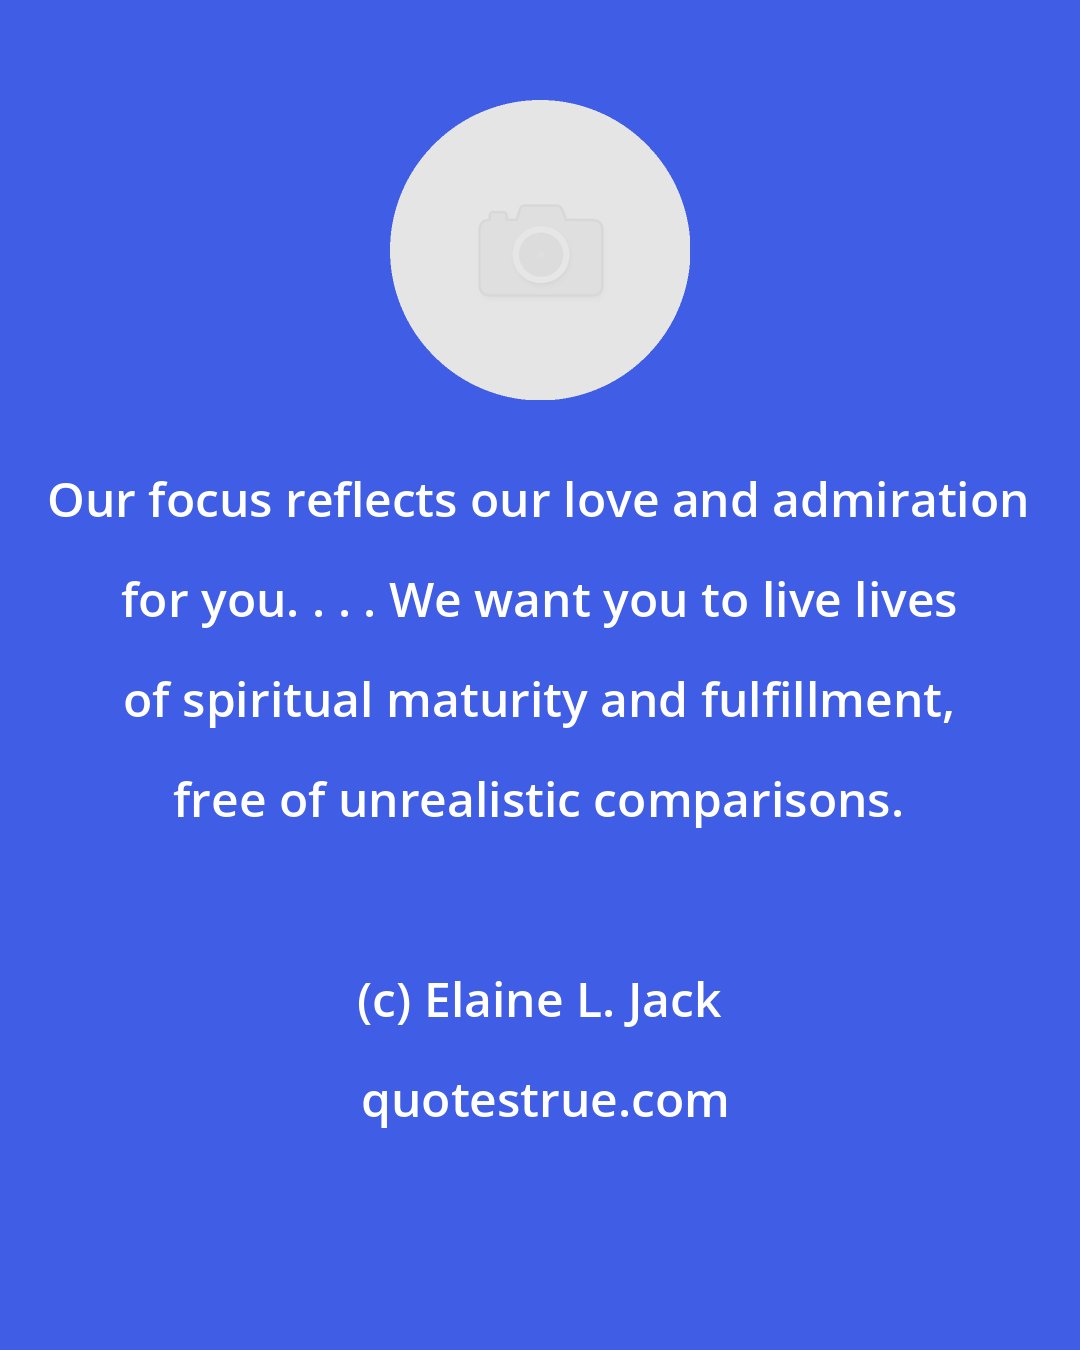 Elaine L. Jack: Our focus reflects our love and admiration for you. . . . We want you to live lives of spiritual maturity and fulfillment, free of unrealistic comparisons.